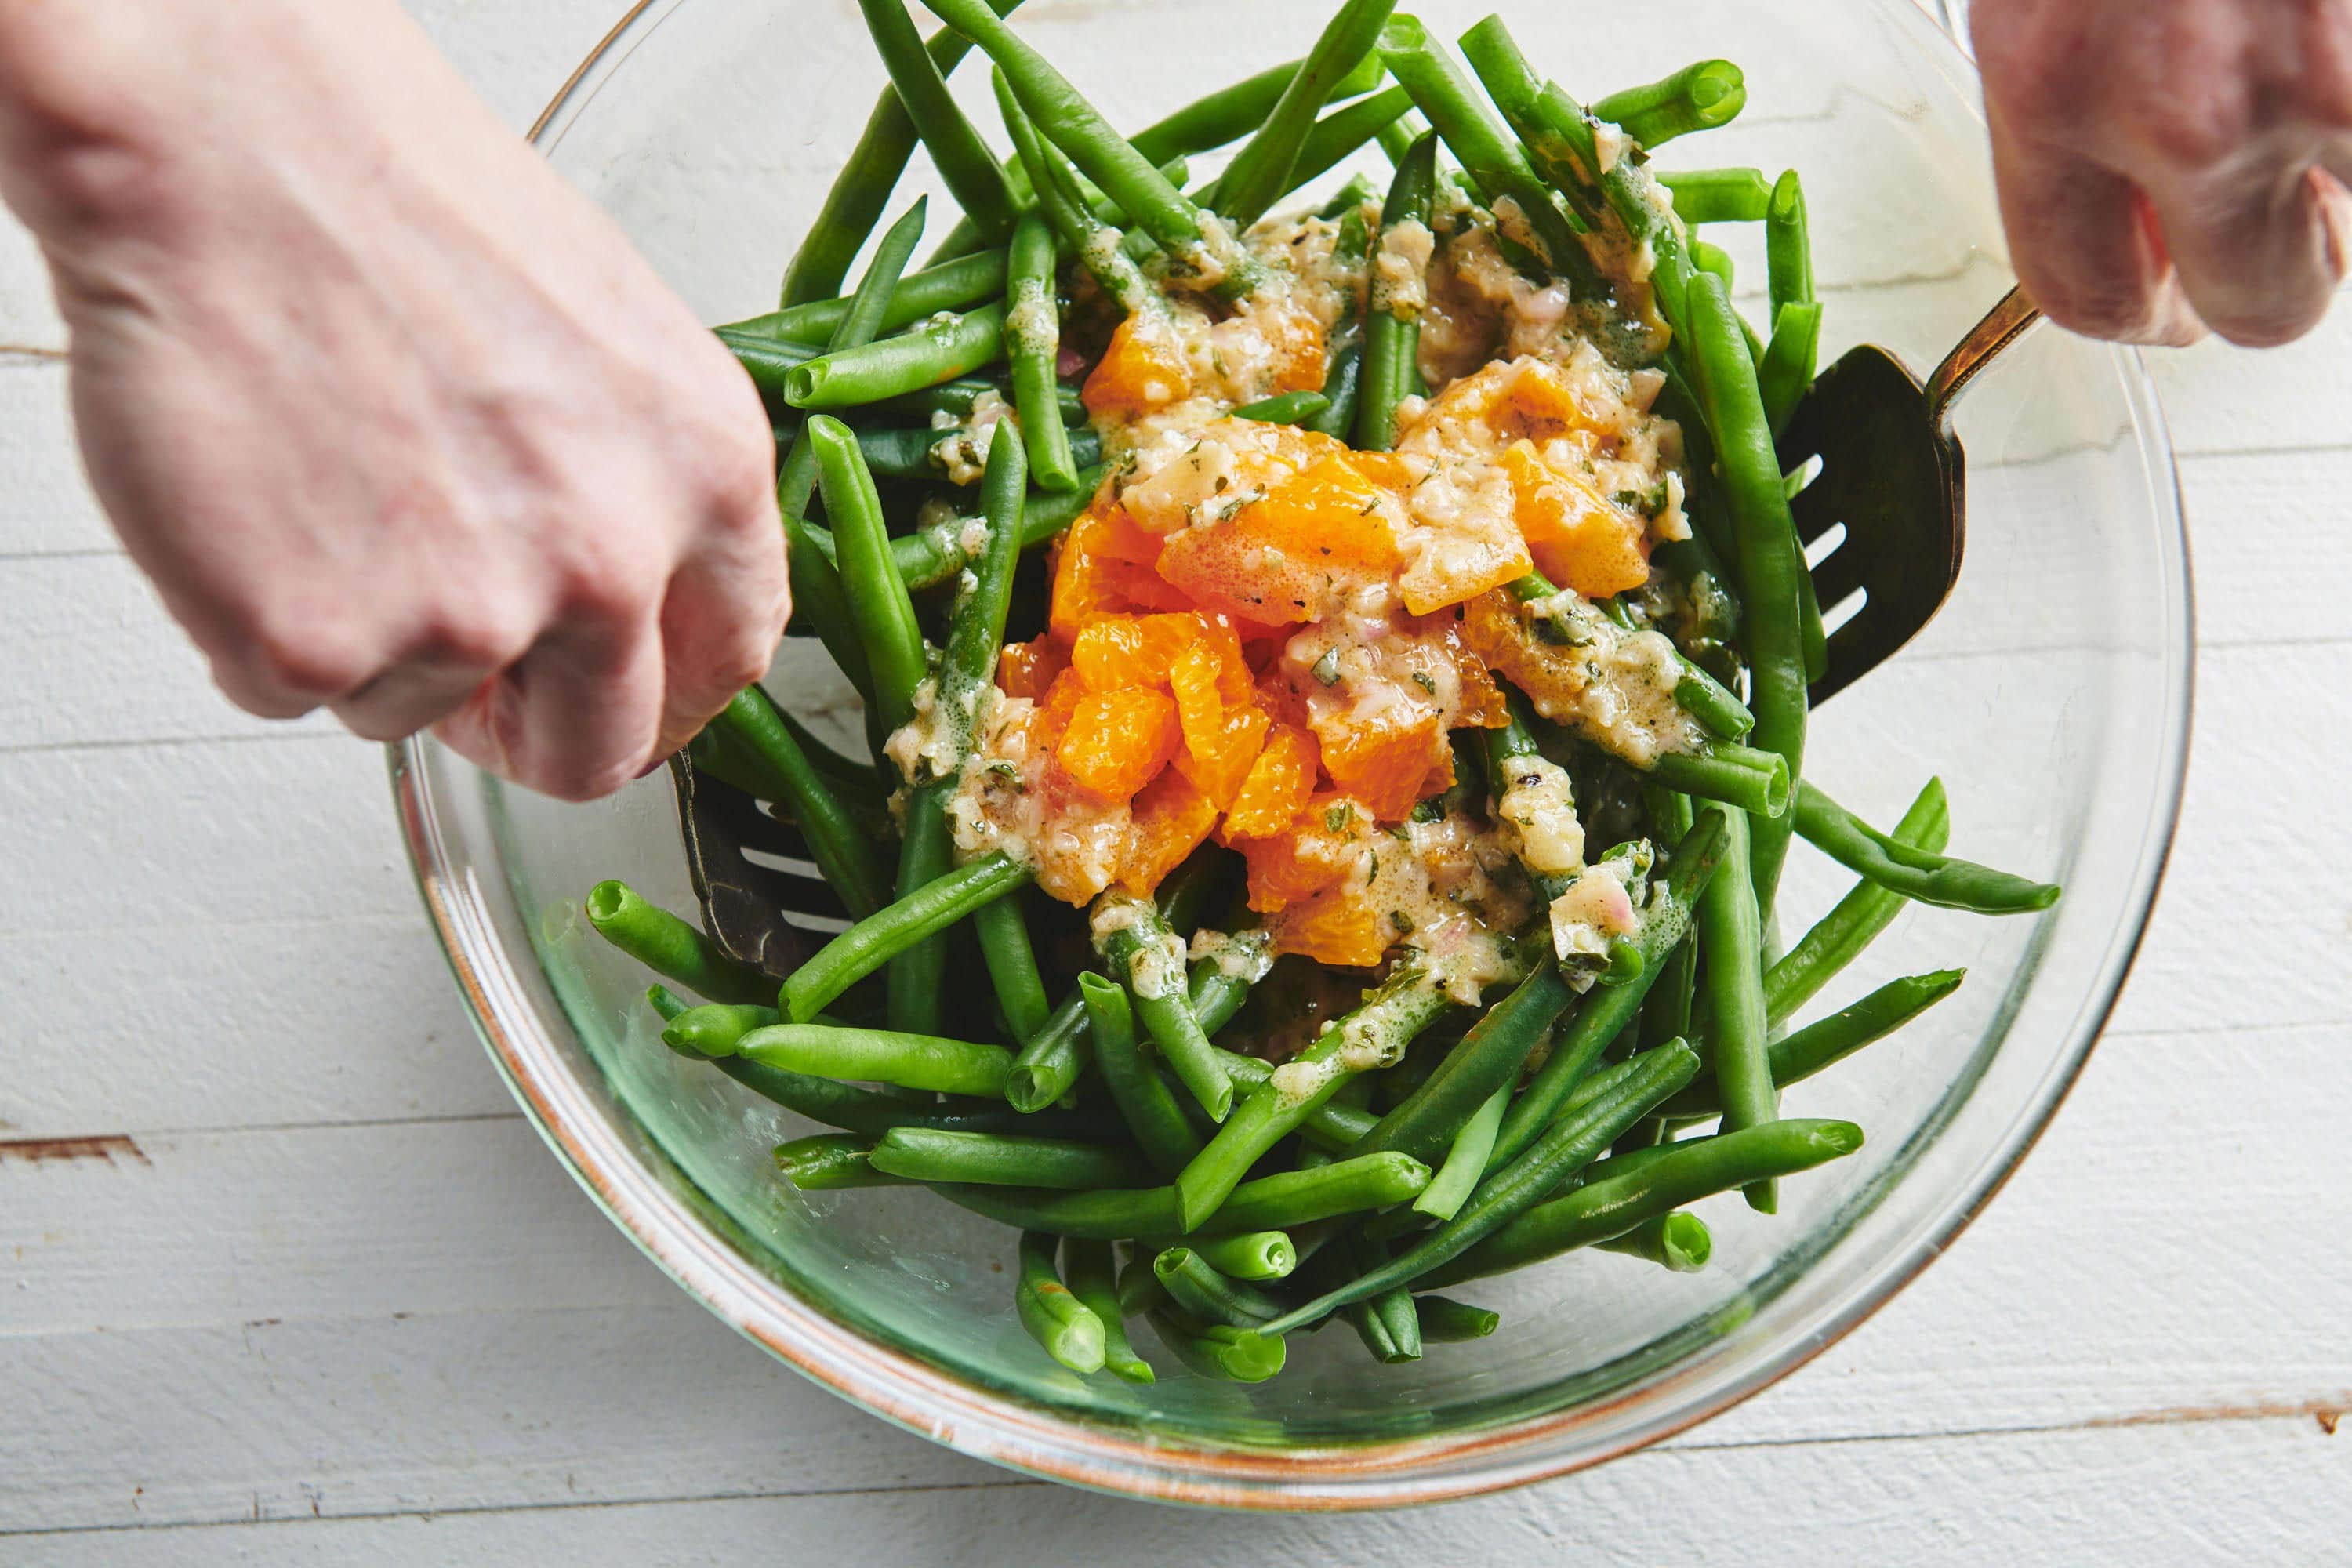 Woman tossing a bowl of green beans, clementine oranges, and dressing.